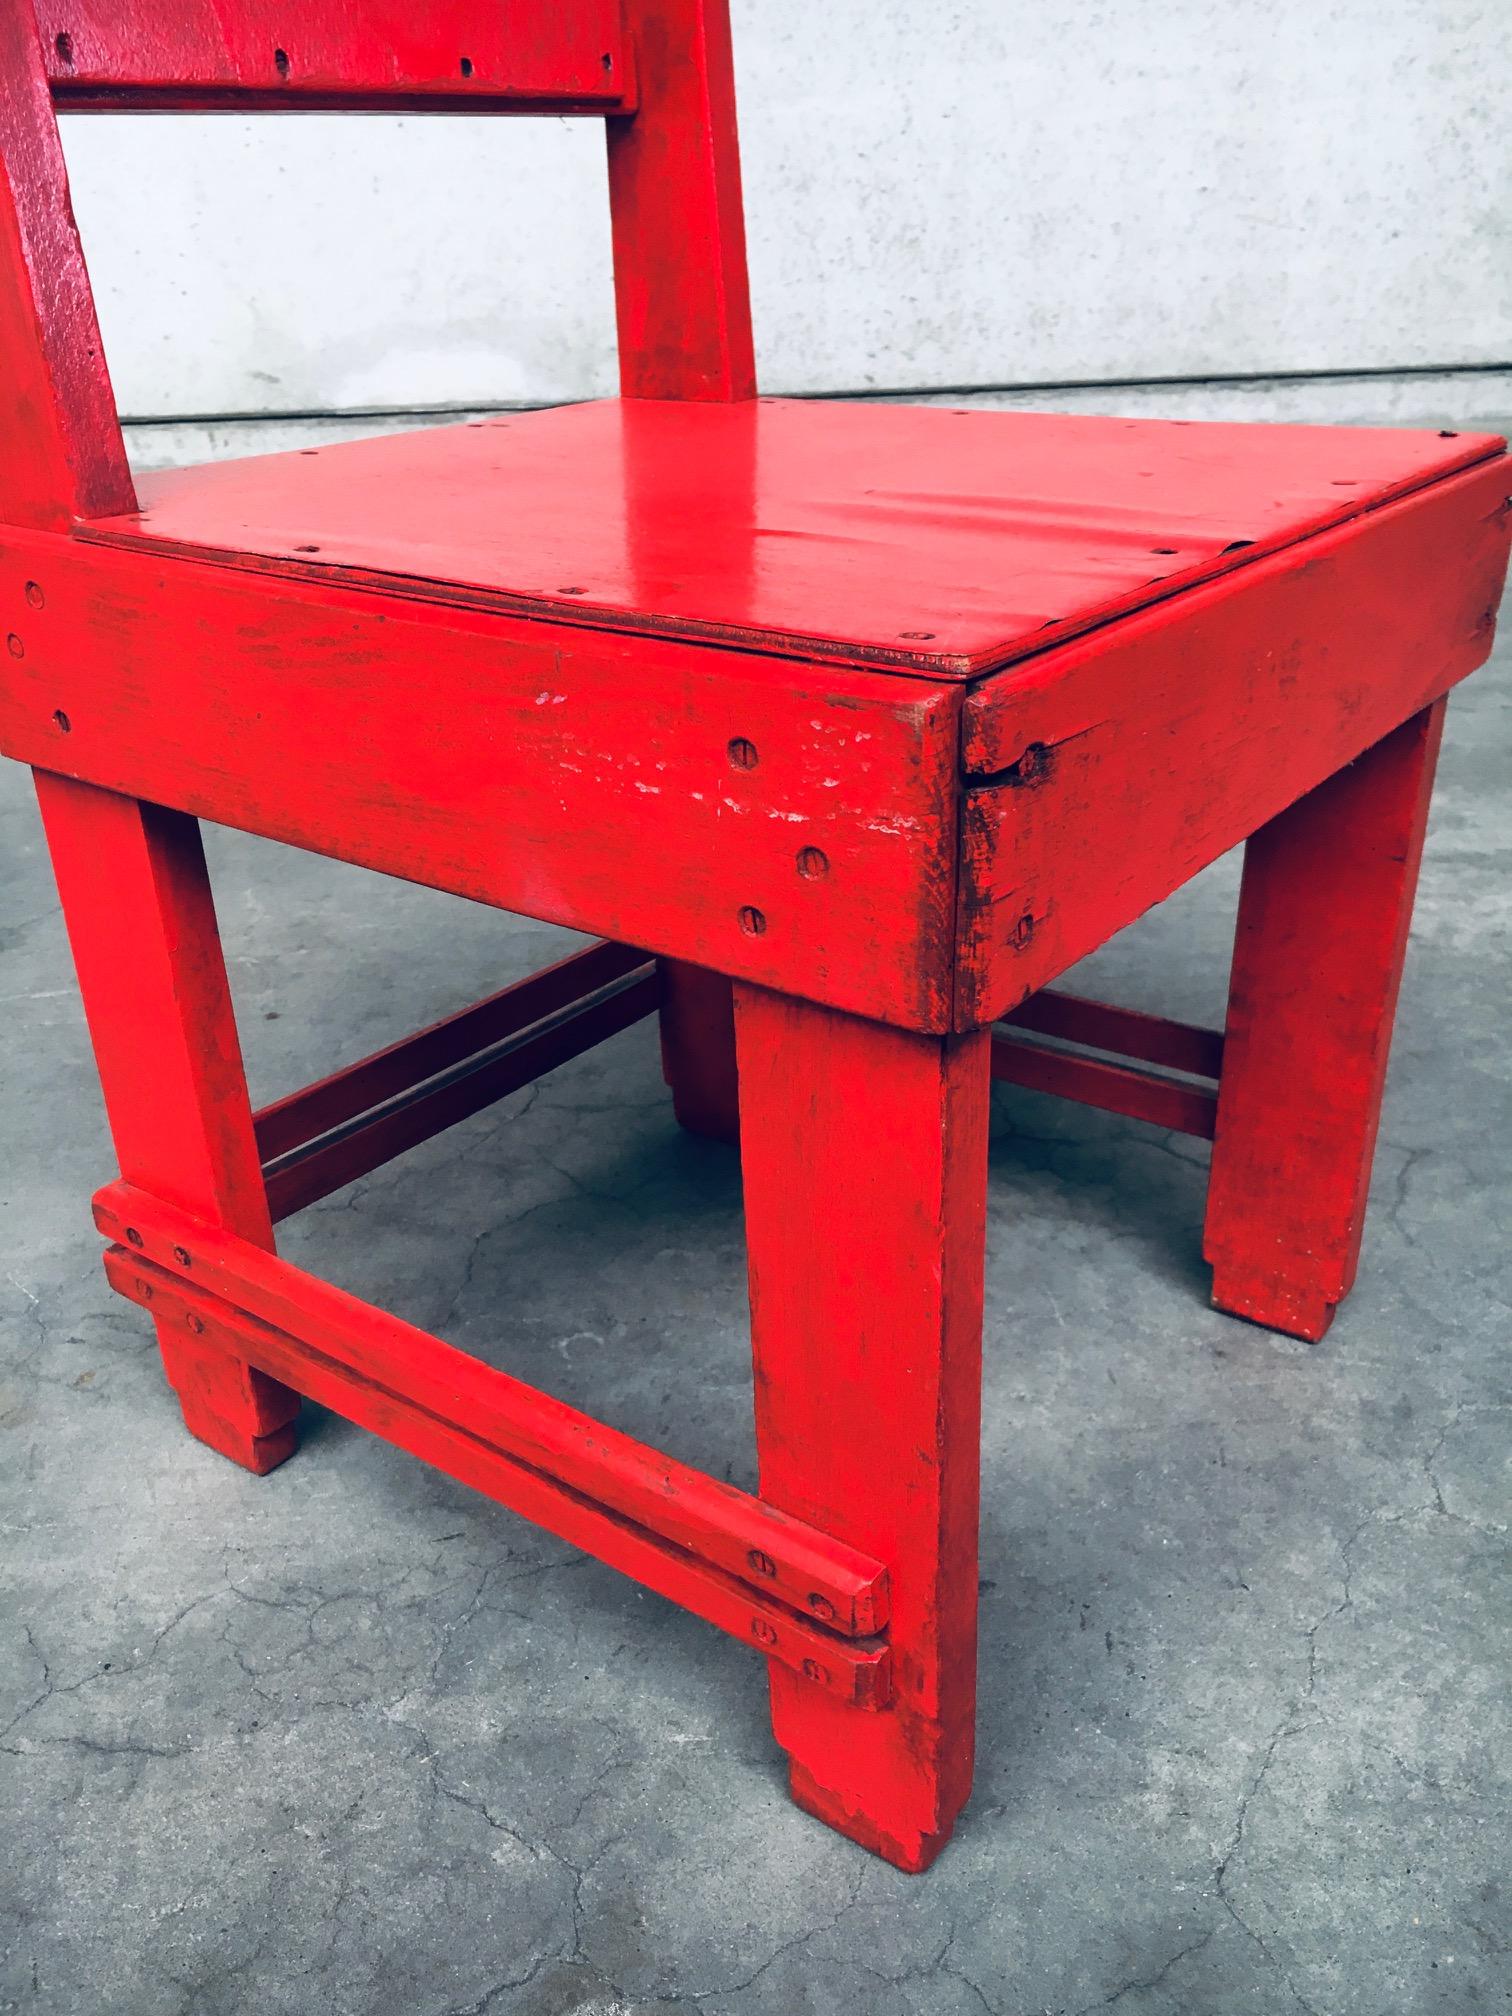 De Stijl Movement Design Red Chair Attributed to Jan Wils, 1920's Netherlands For Sale 7